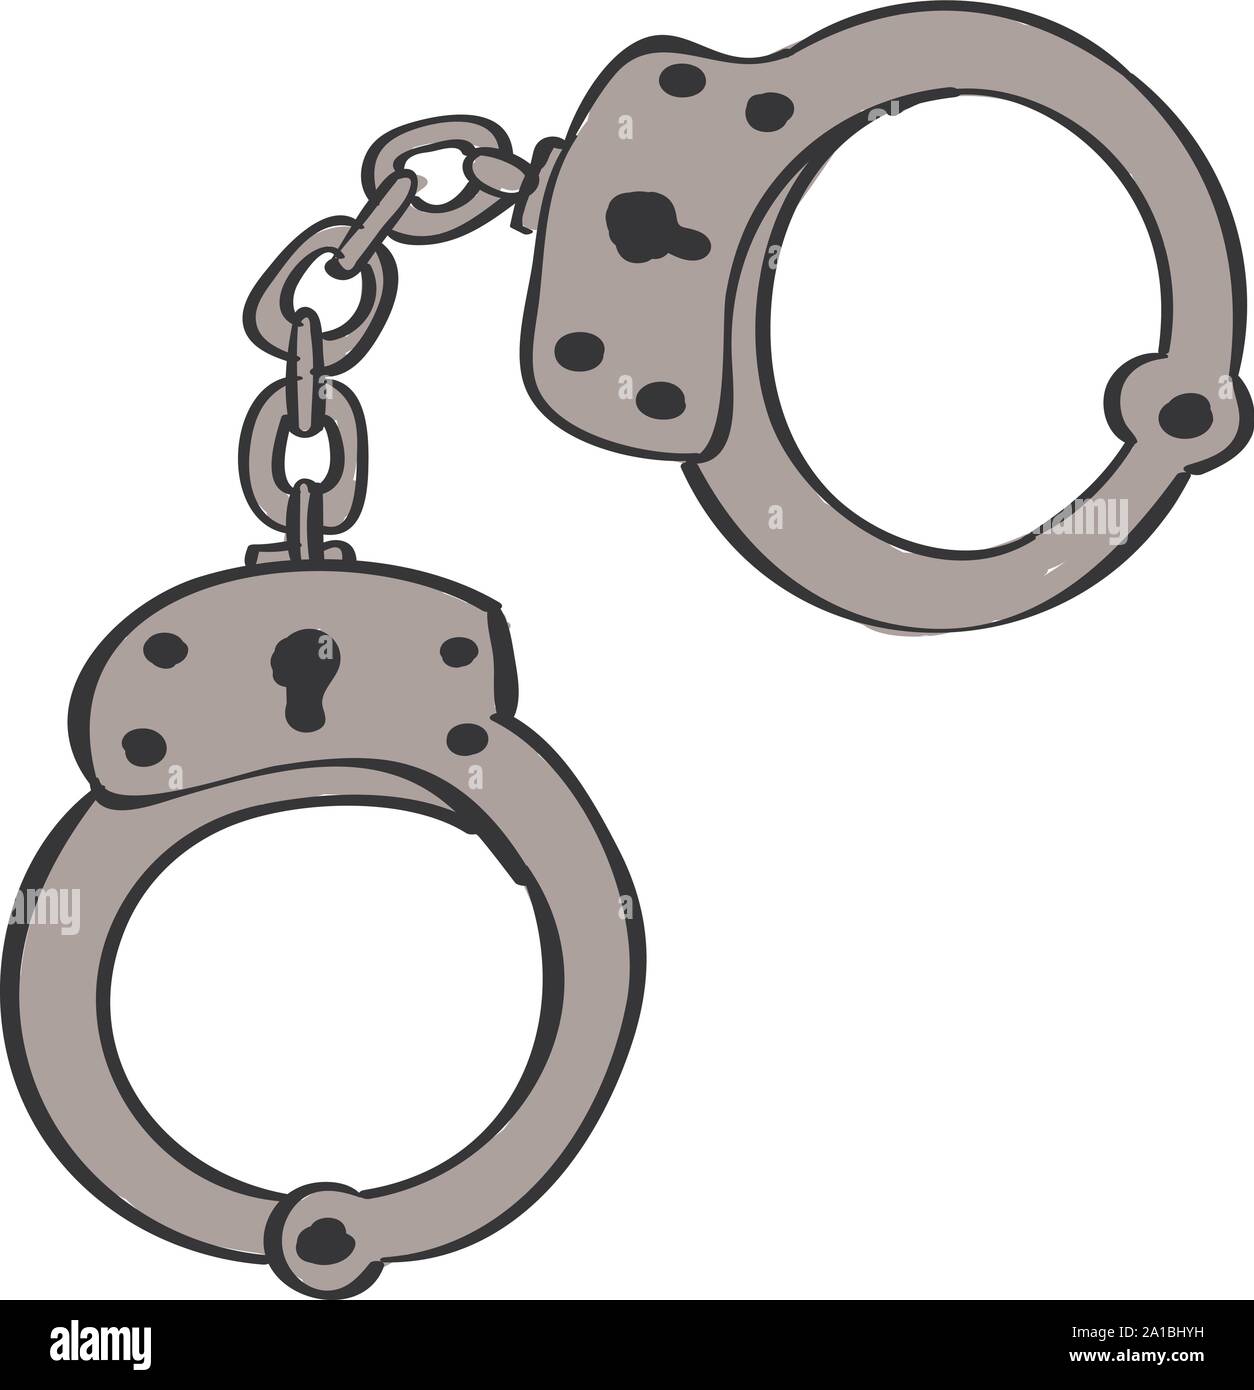 Handcuffs, illustration, vector on white background. Stock Vector